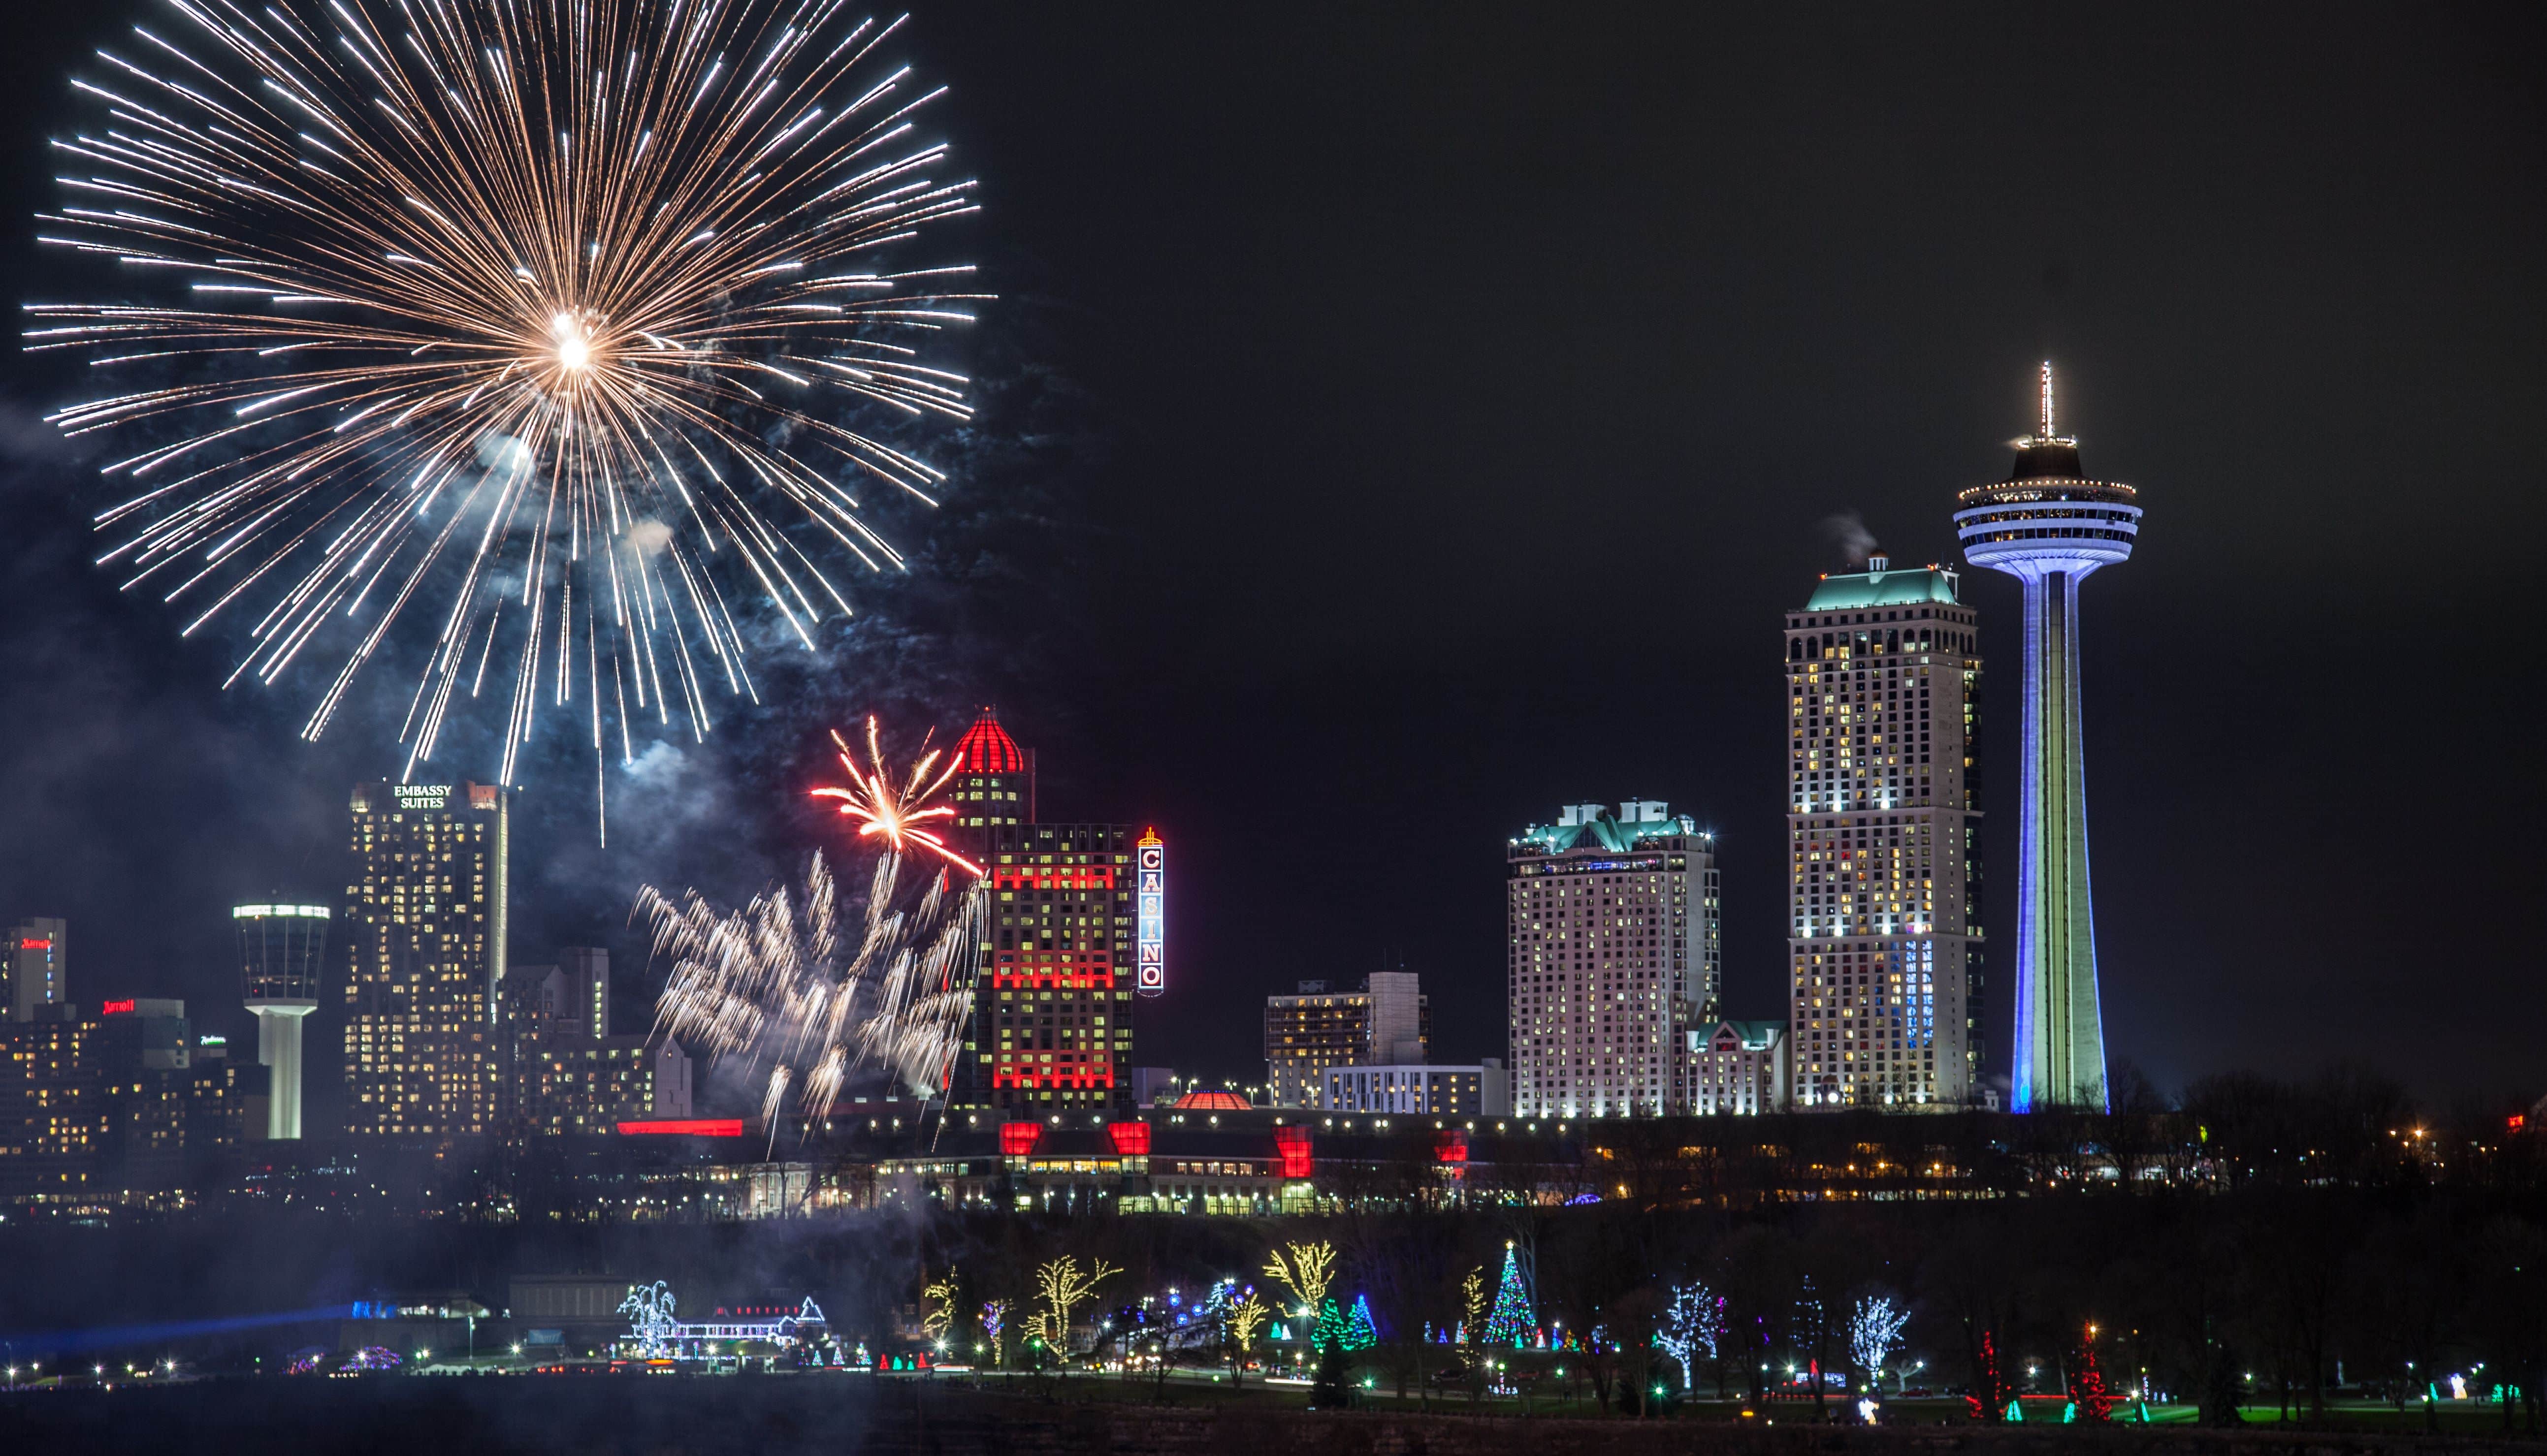 New Year's Eve in Niagara Falls, Ontario- The Celebration of a Lifetime